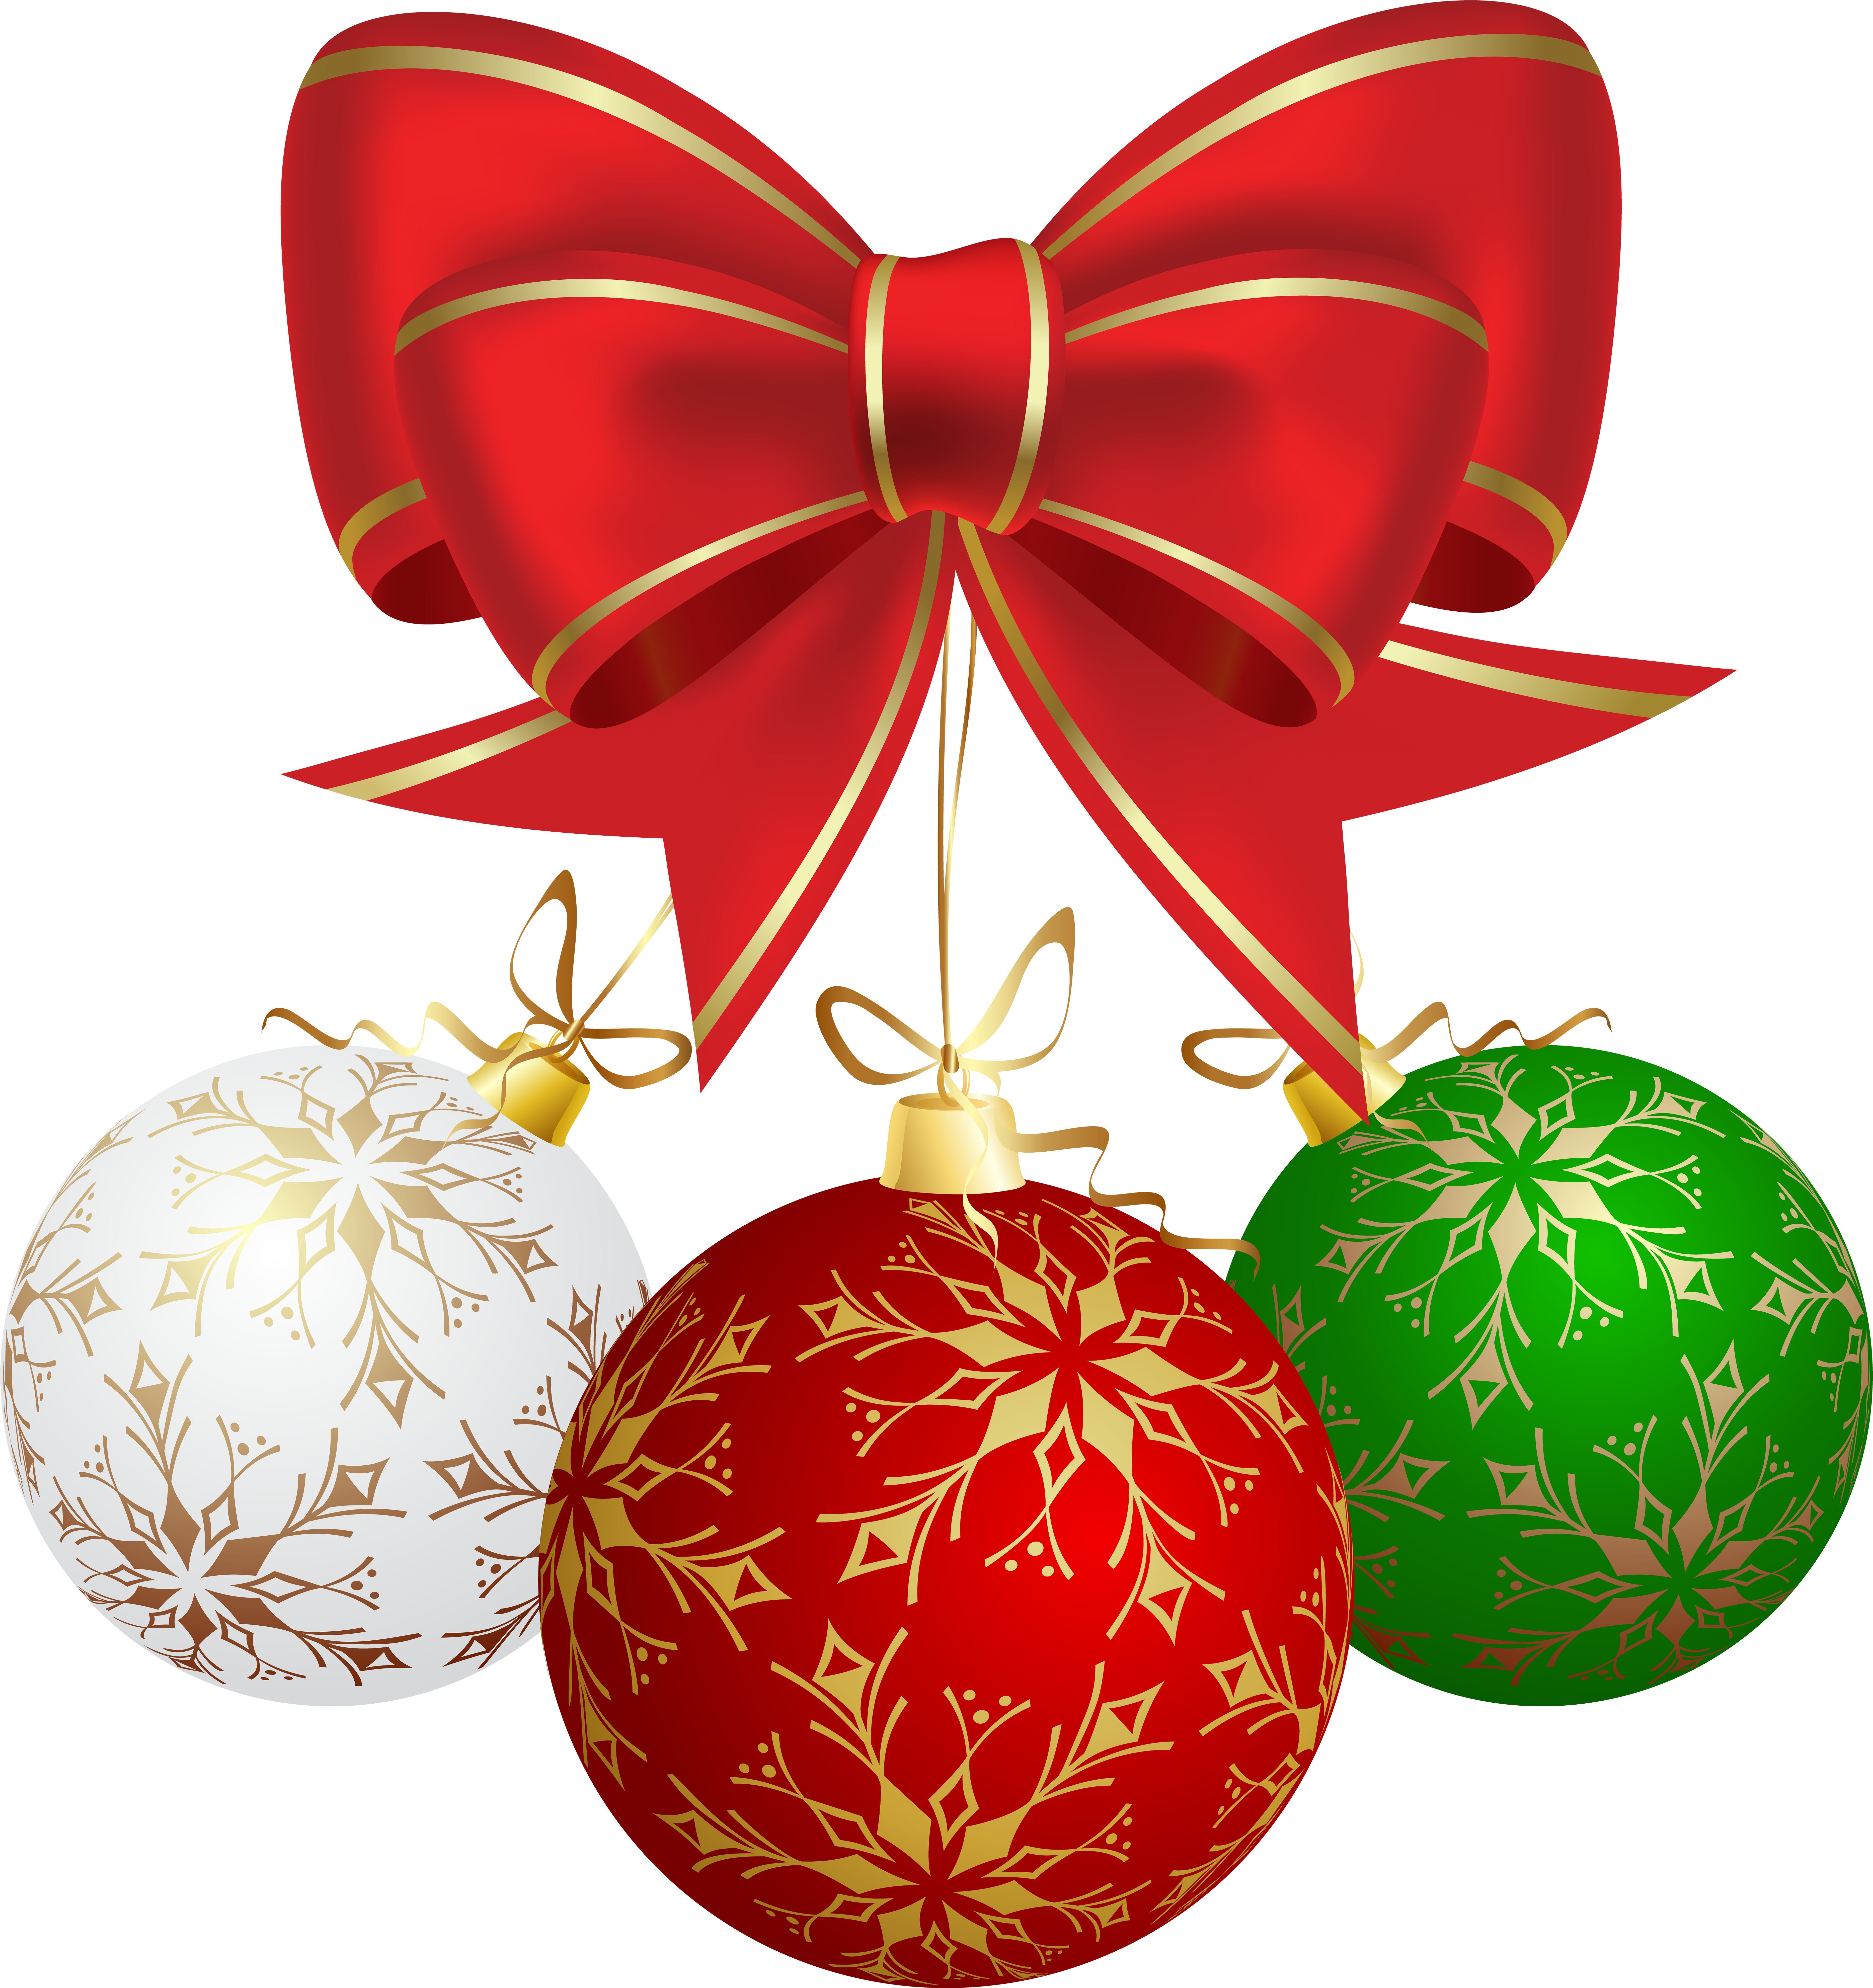 Festive Christmas Ornamentswith Red Bow PNG image